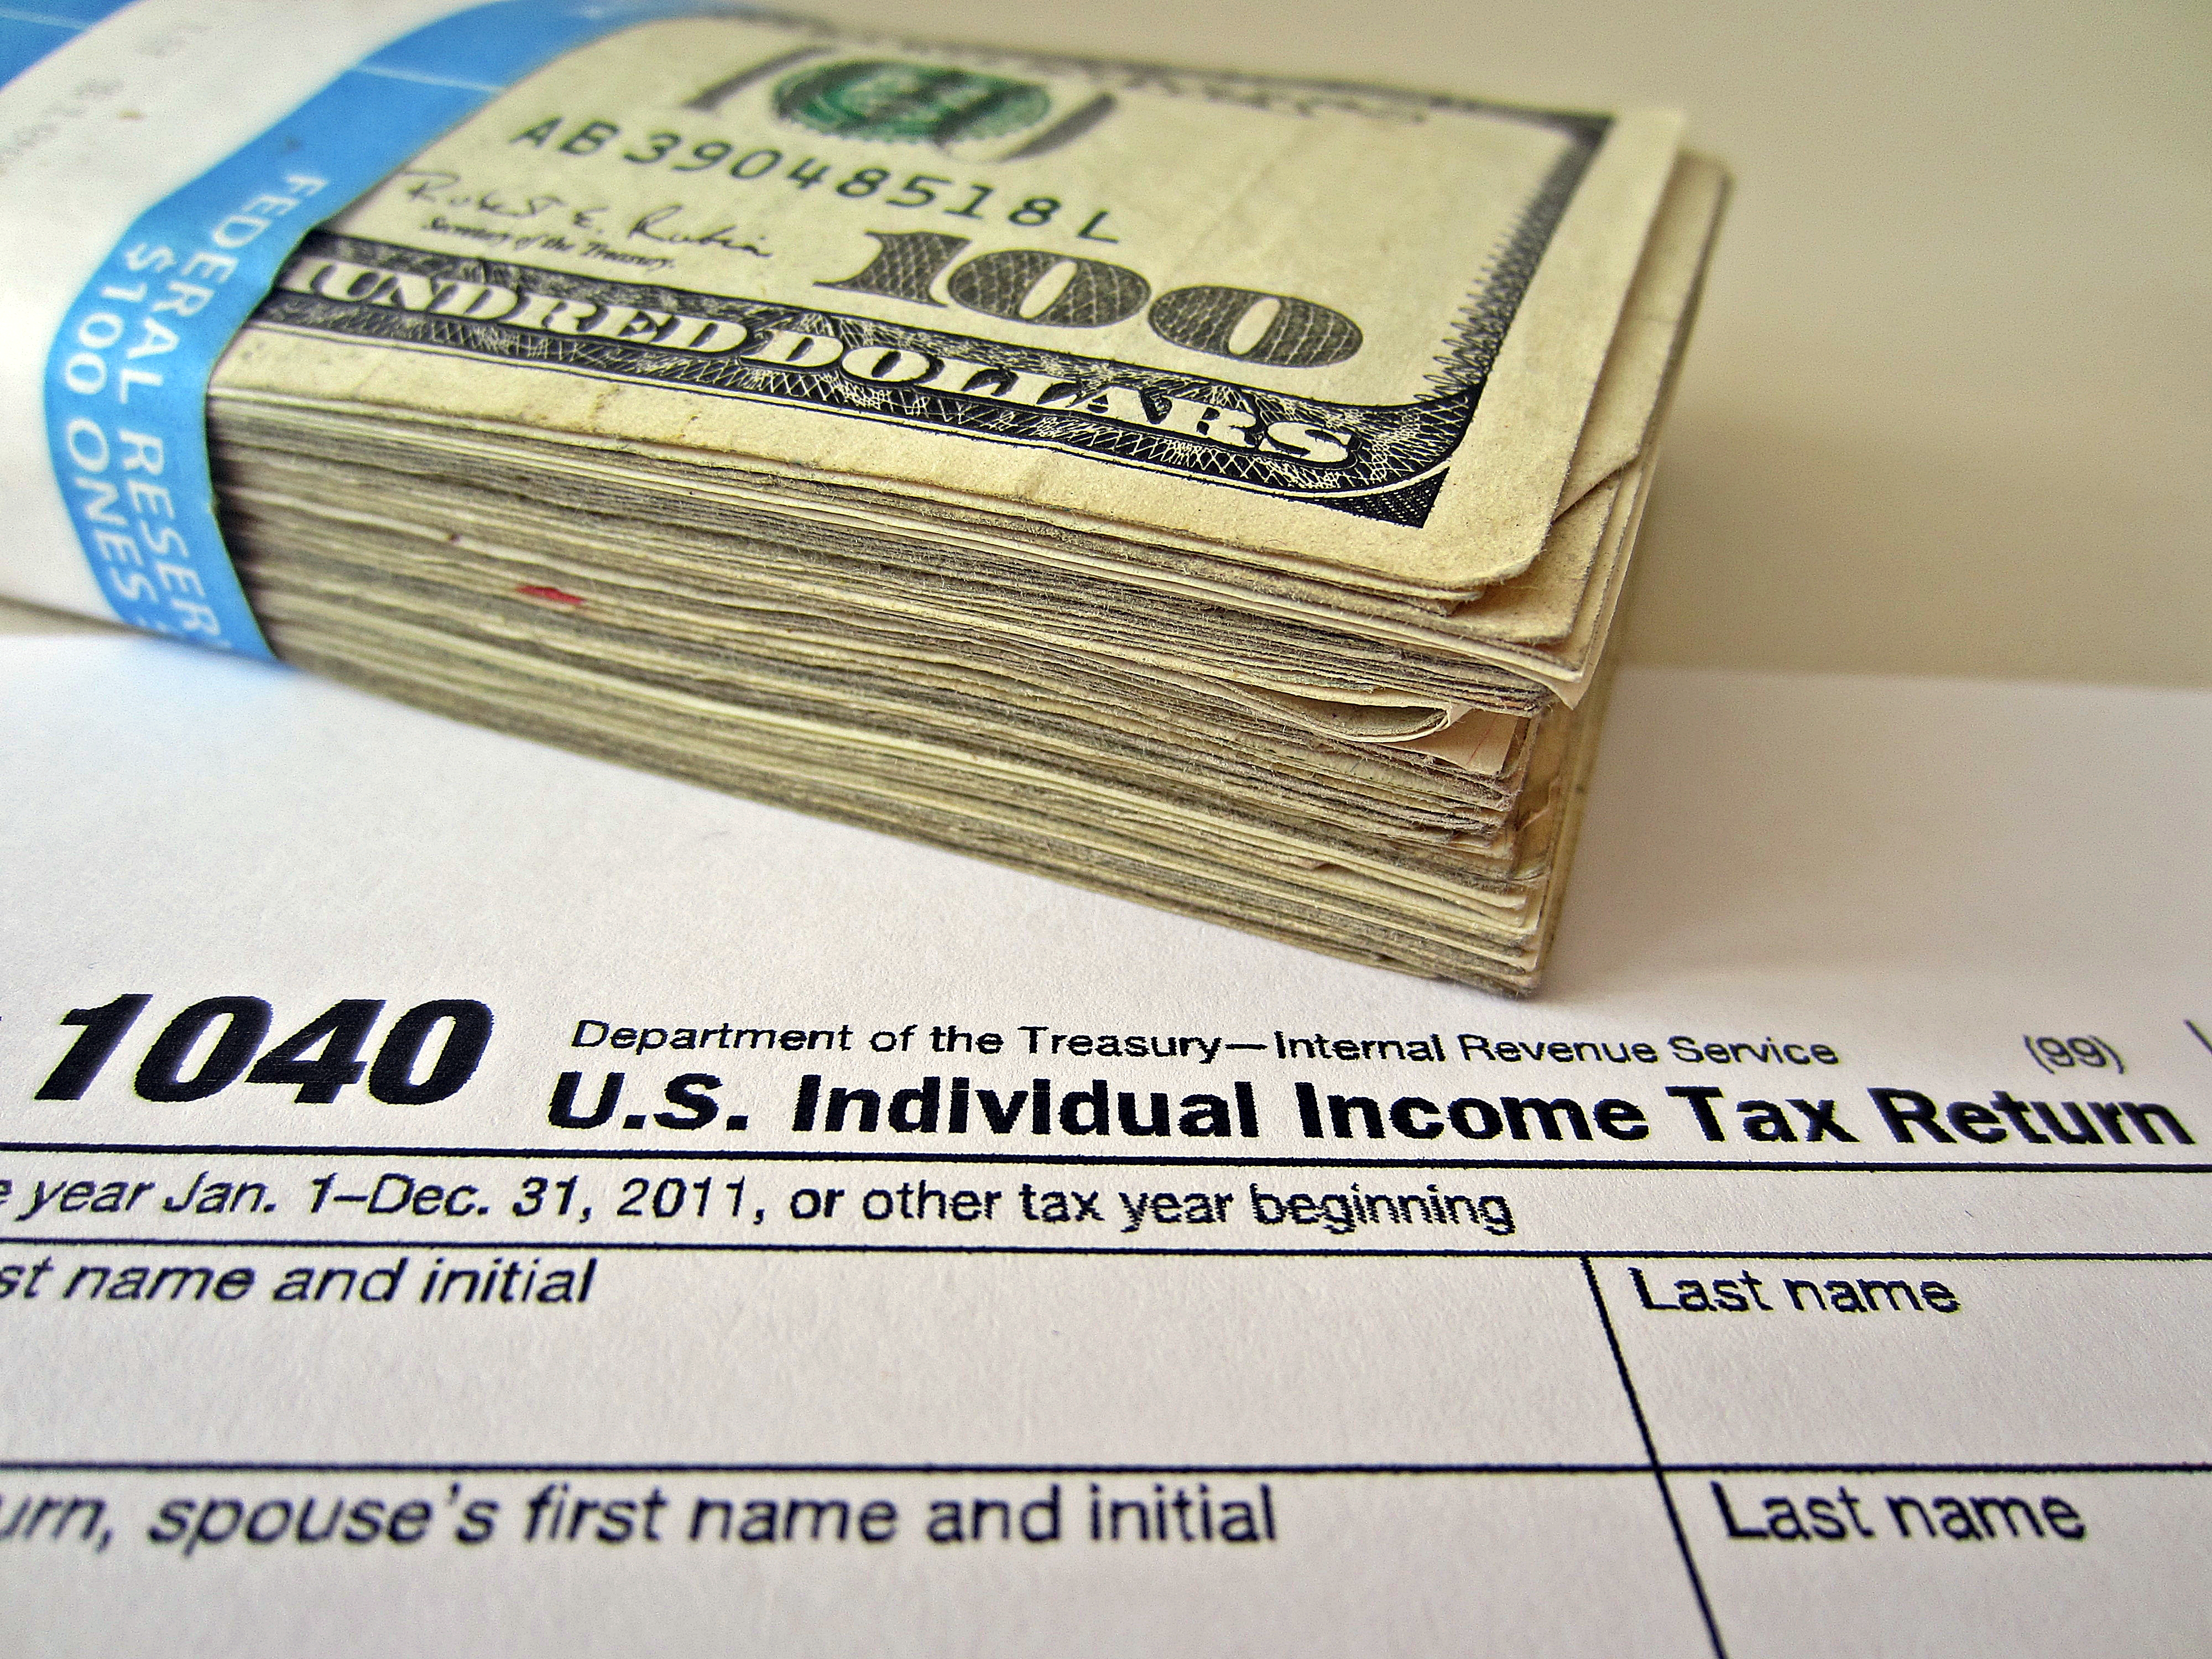 Be Cautious When Claiming Tax Deductions to Avoid IRS Audits